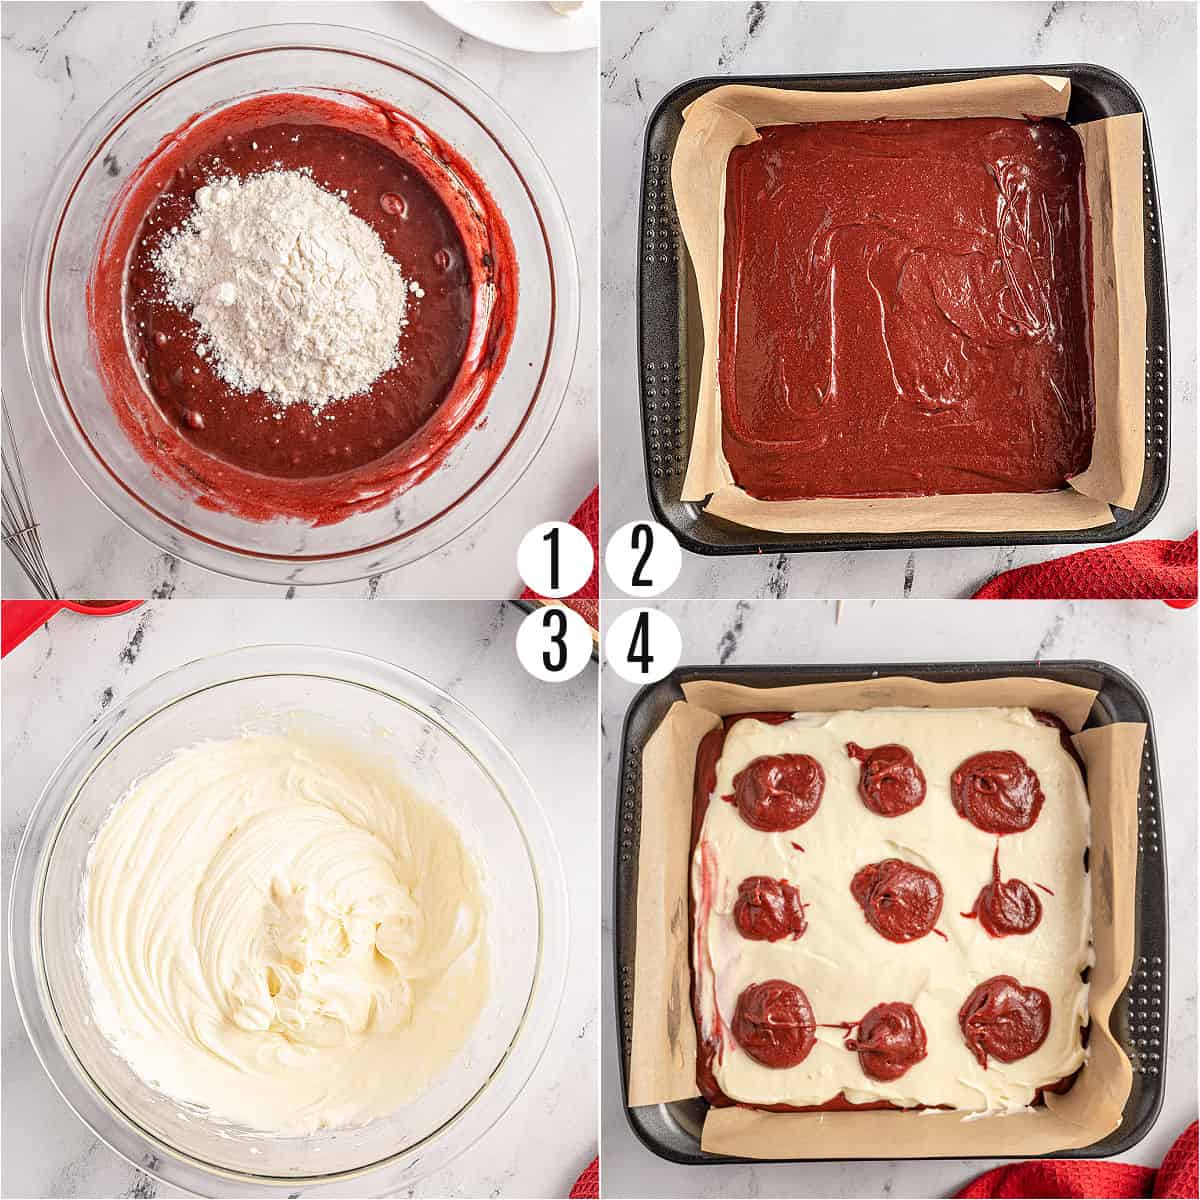 Step by step photos showing how to make red velvet cheesecake brownies.